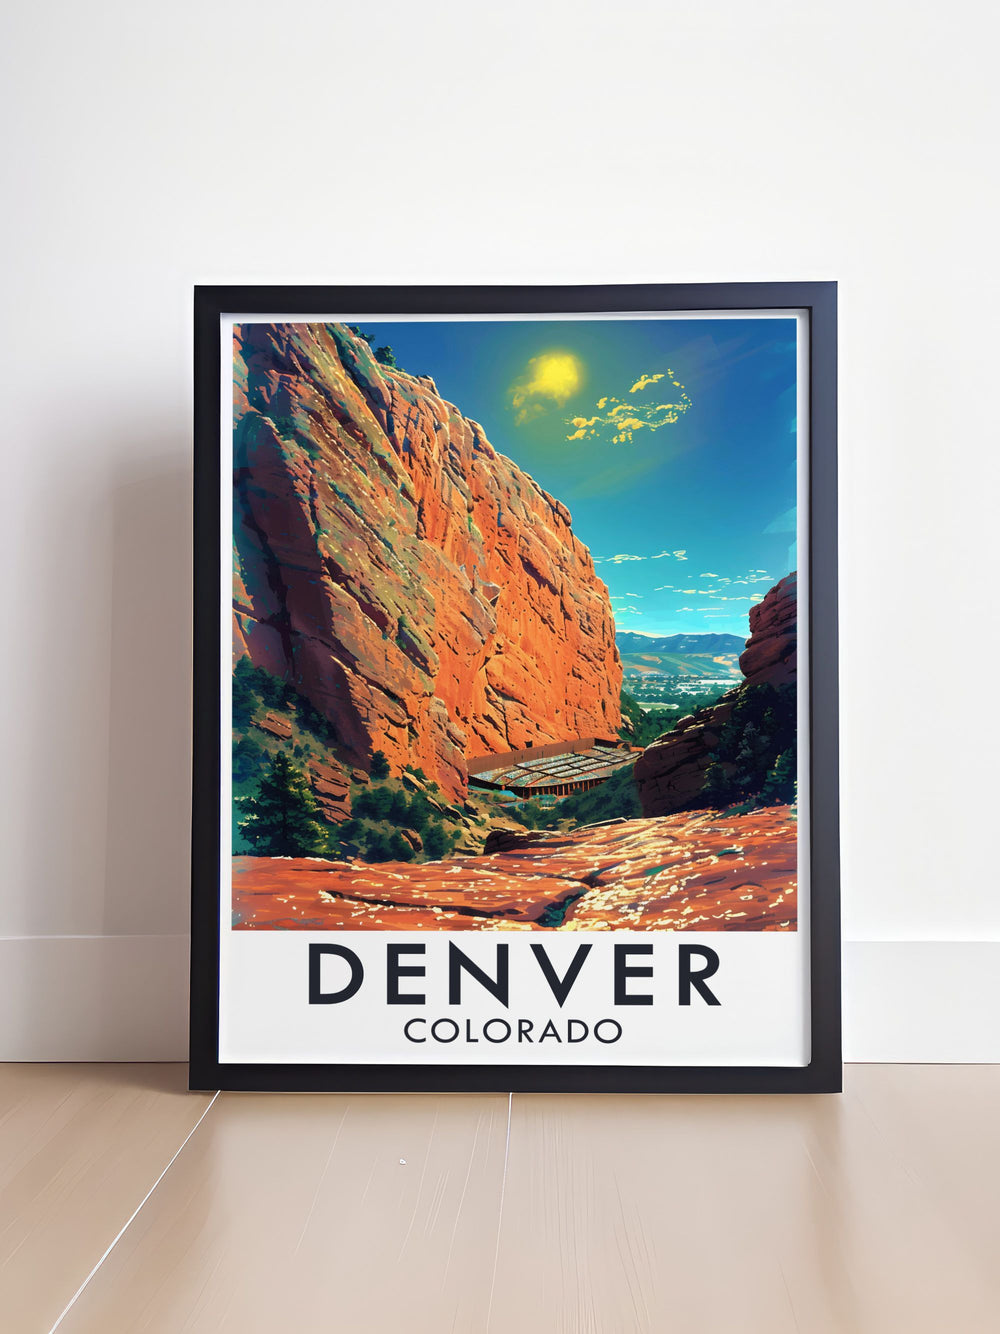 Boulder Colorado is depicted in this art print, highlighting its lively downtown area and scenic mountain backdrop, making it a perfect addition to any art collection.